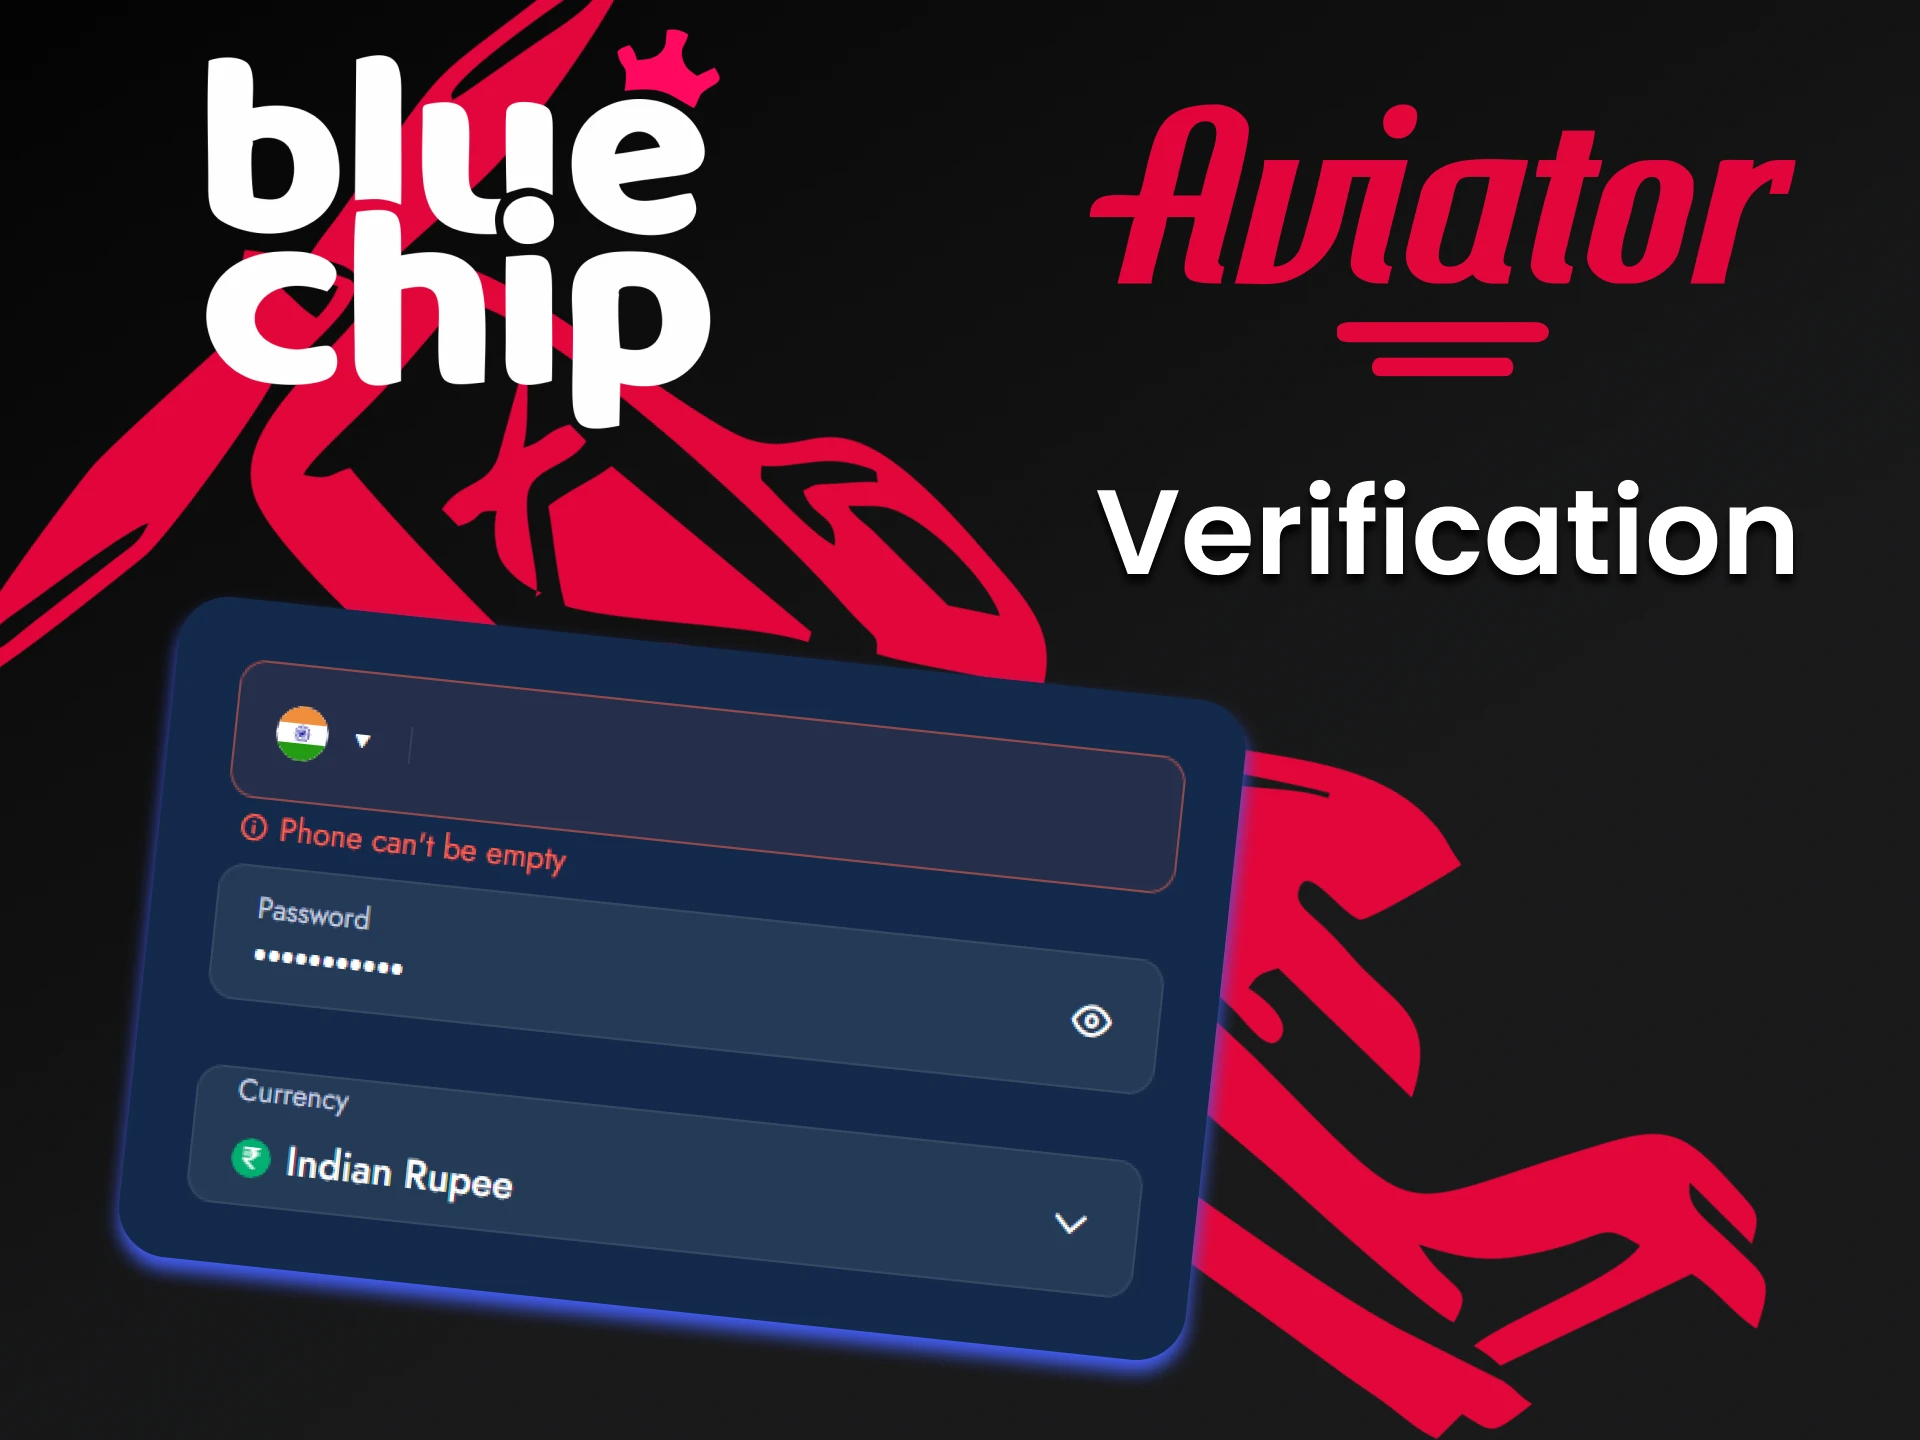 Fill in your personal details to start playing Aviator on Bluechip.